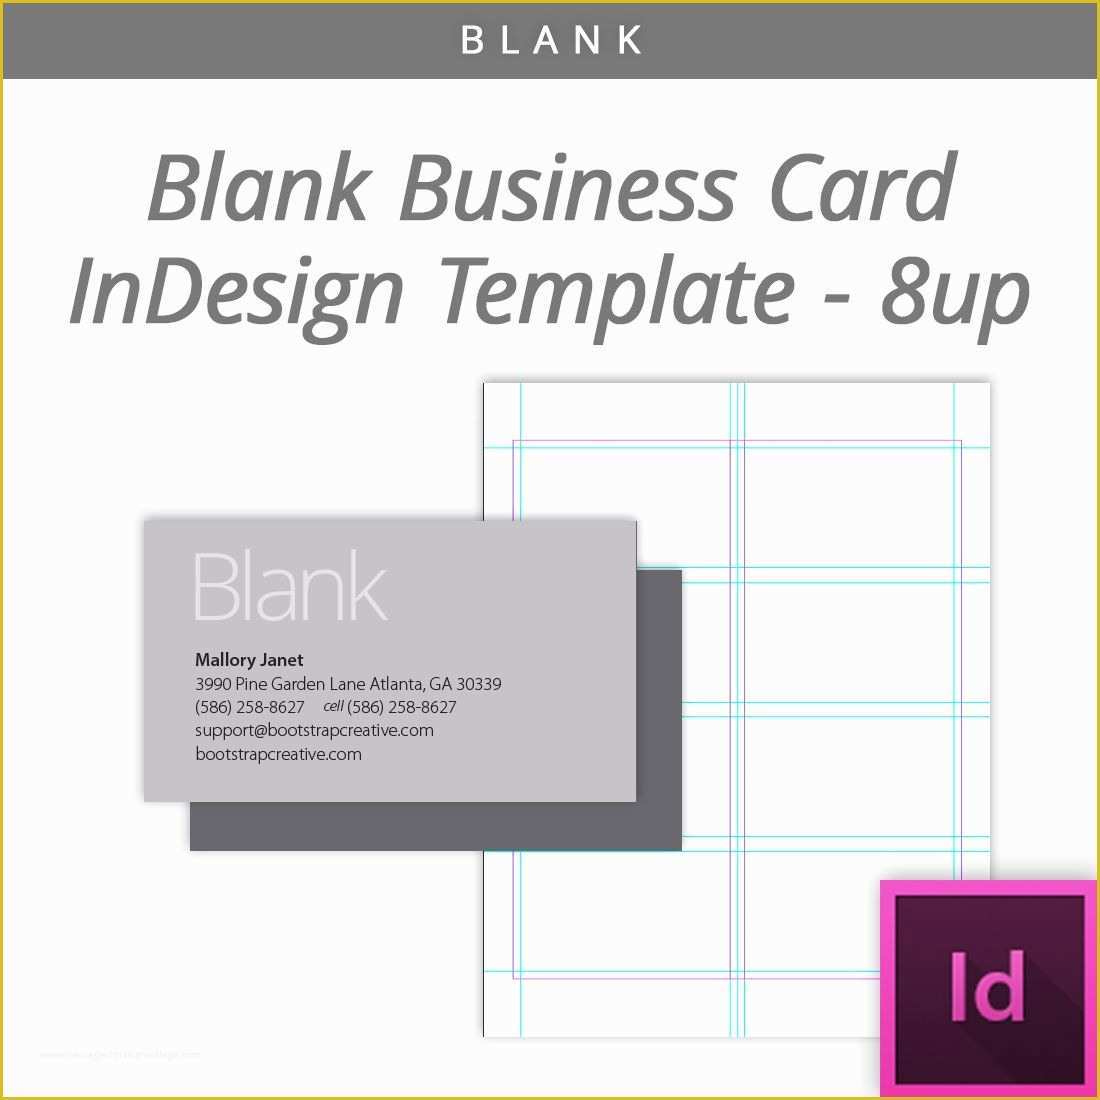 Business Card Template Free Download Of Blank Indesign Business Card Template 8 Up Free Download